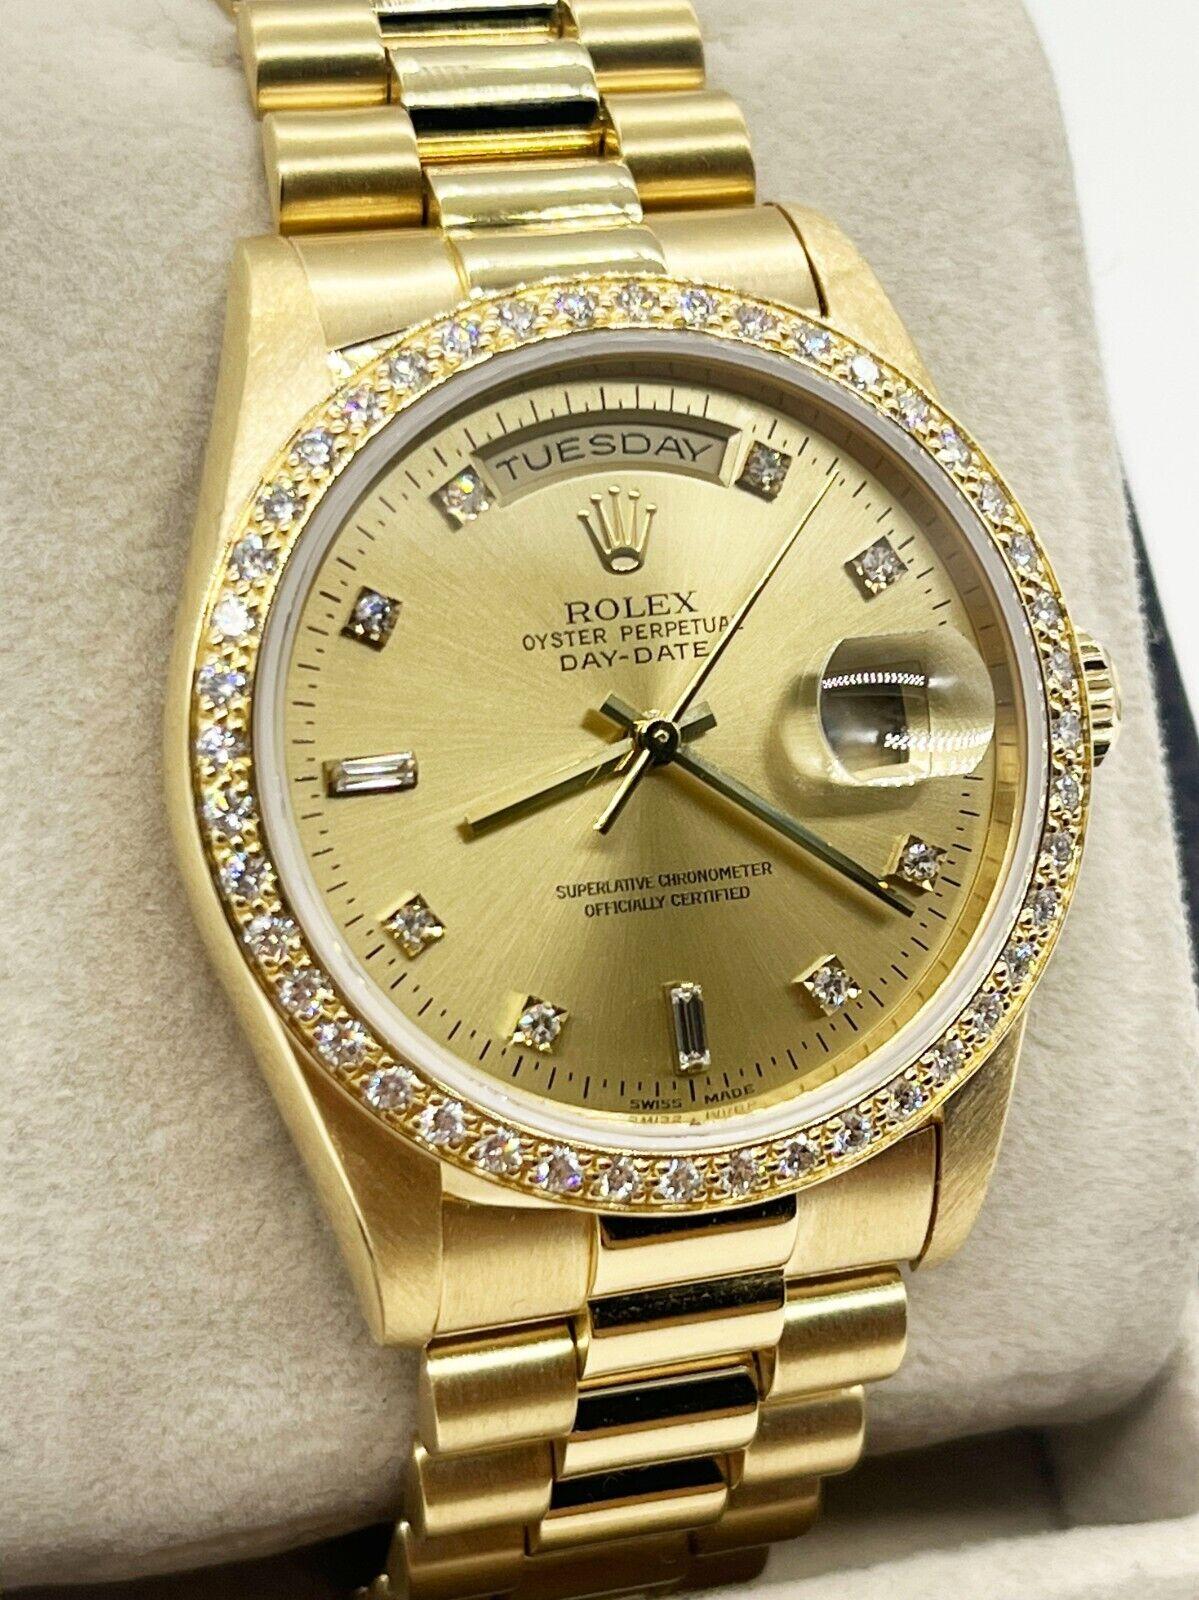 Style Number: 18348
 
Serial: W072***

Year: 1999
 
Model: President Day Date 
 
Case Material: 18K Yellow Gold
 
Band: 18K Yellow Gold
 
Bezel: Original Factory Diamond Bezel 
 
Dial: Original Factory Diamond Dial 
 
Face: Sapphire Crystal 
 
Case